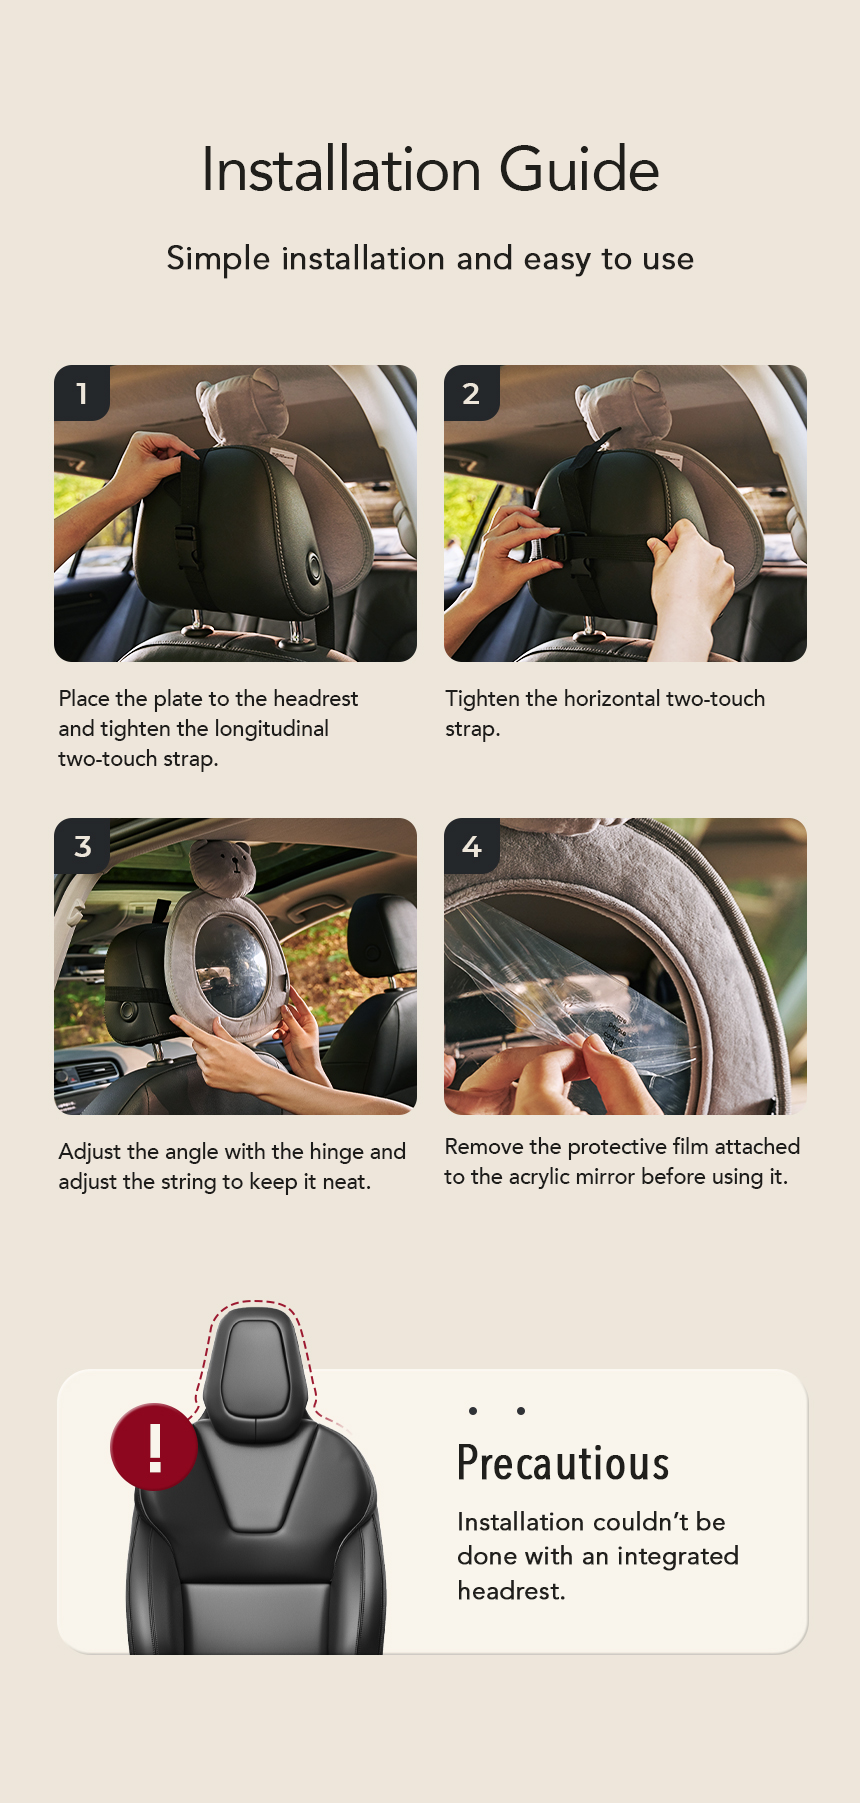 poled seat mirror installation guide